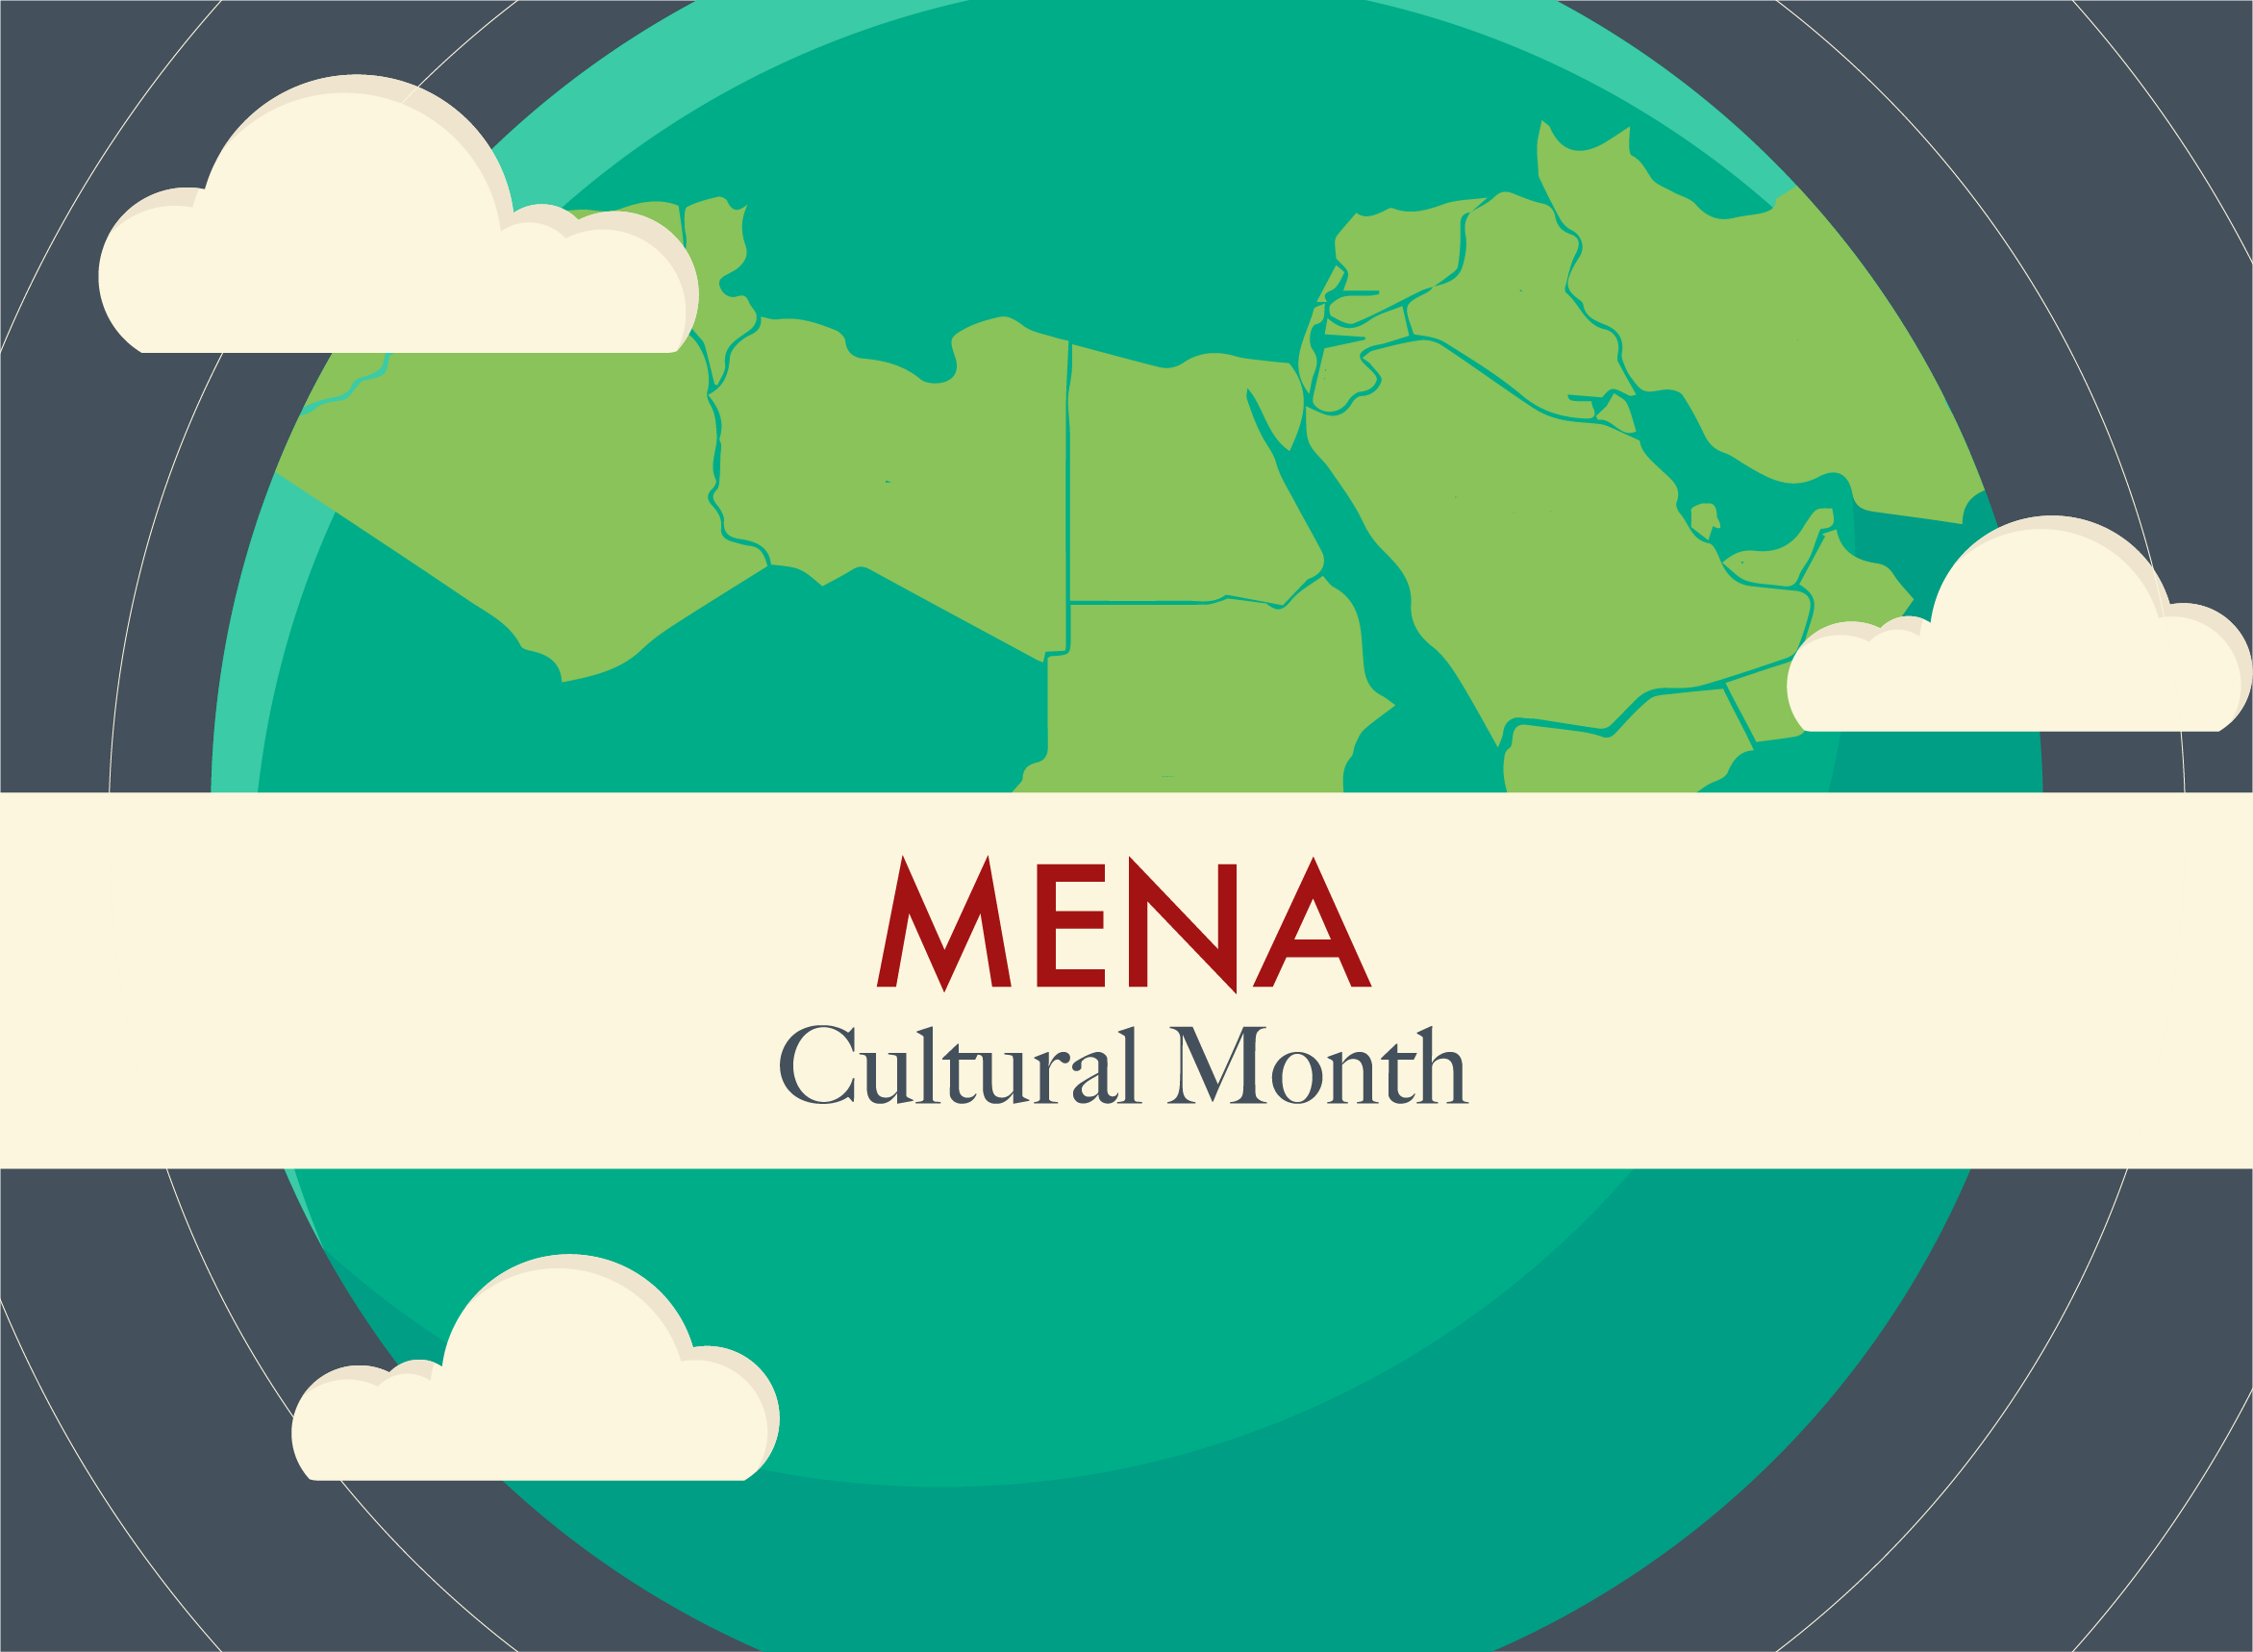 GRAPHIC: Infographic depicting statistics and facts about the MENA population. Infographic created by The Signal reporter Estefany Sanchez.